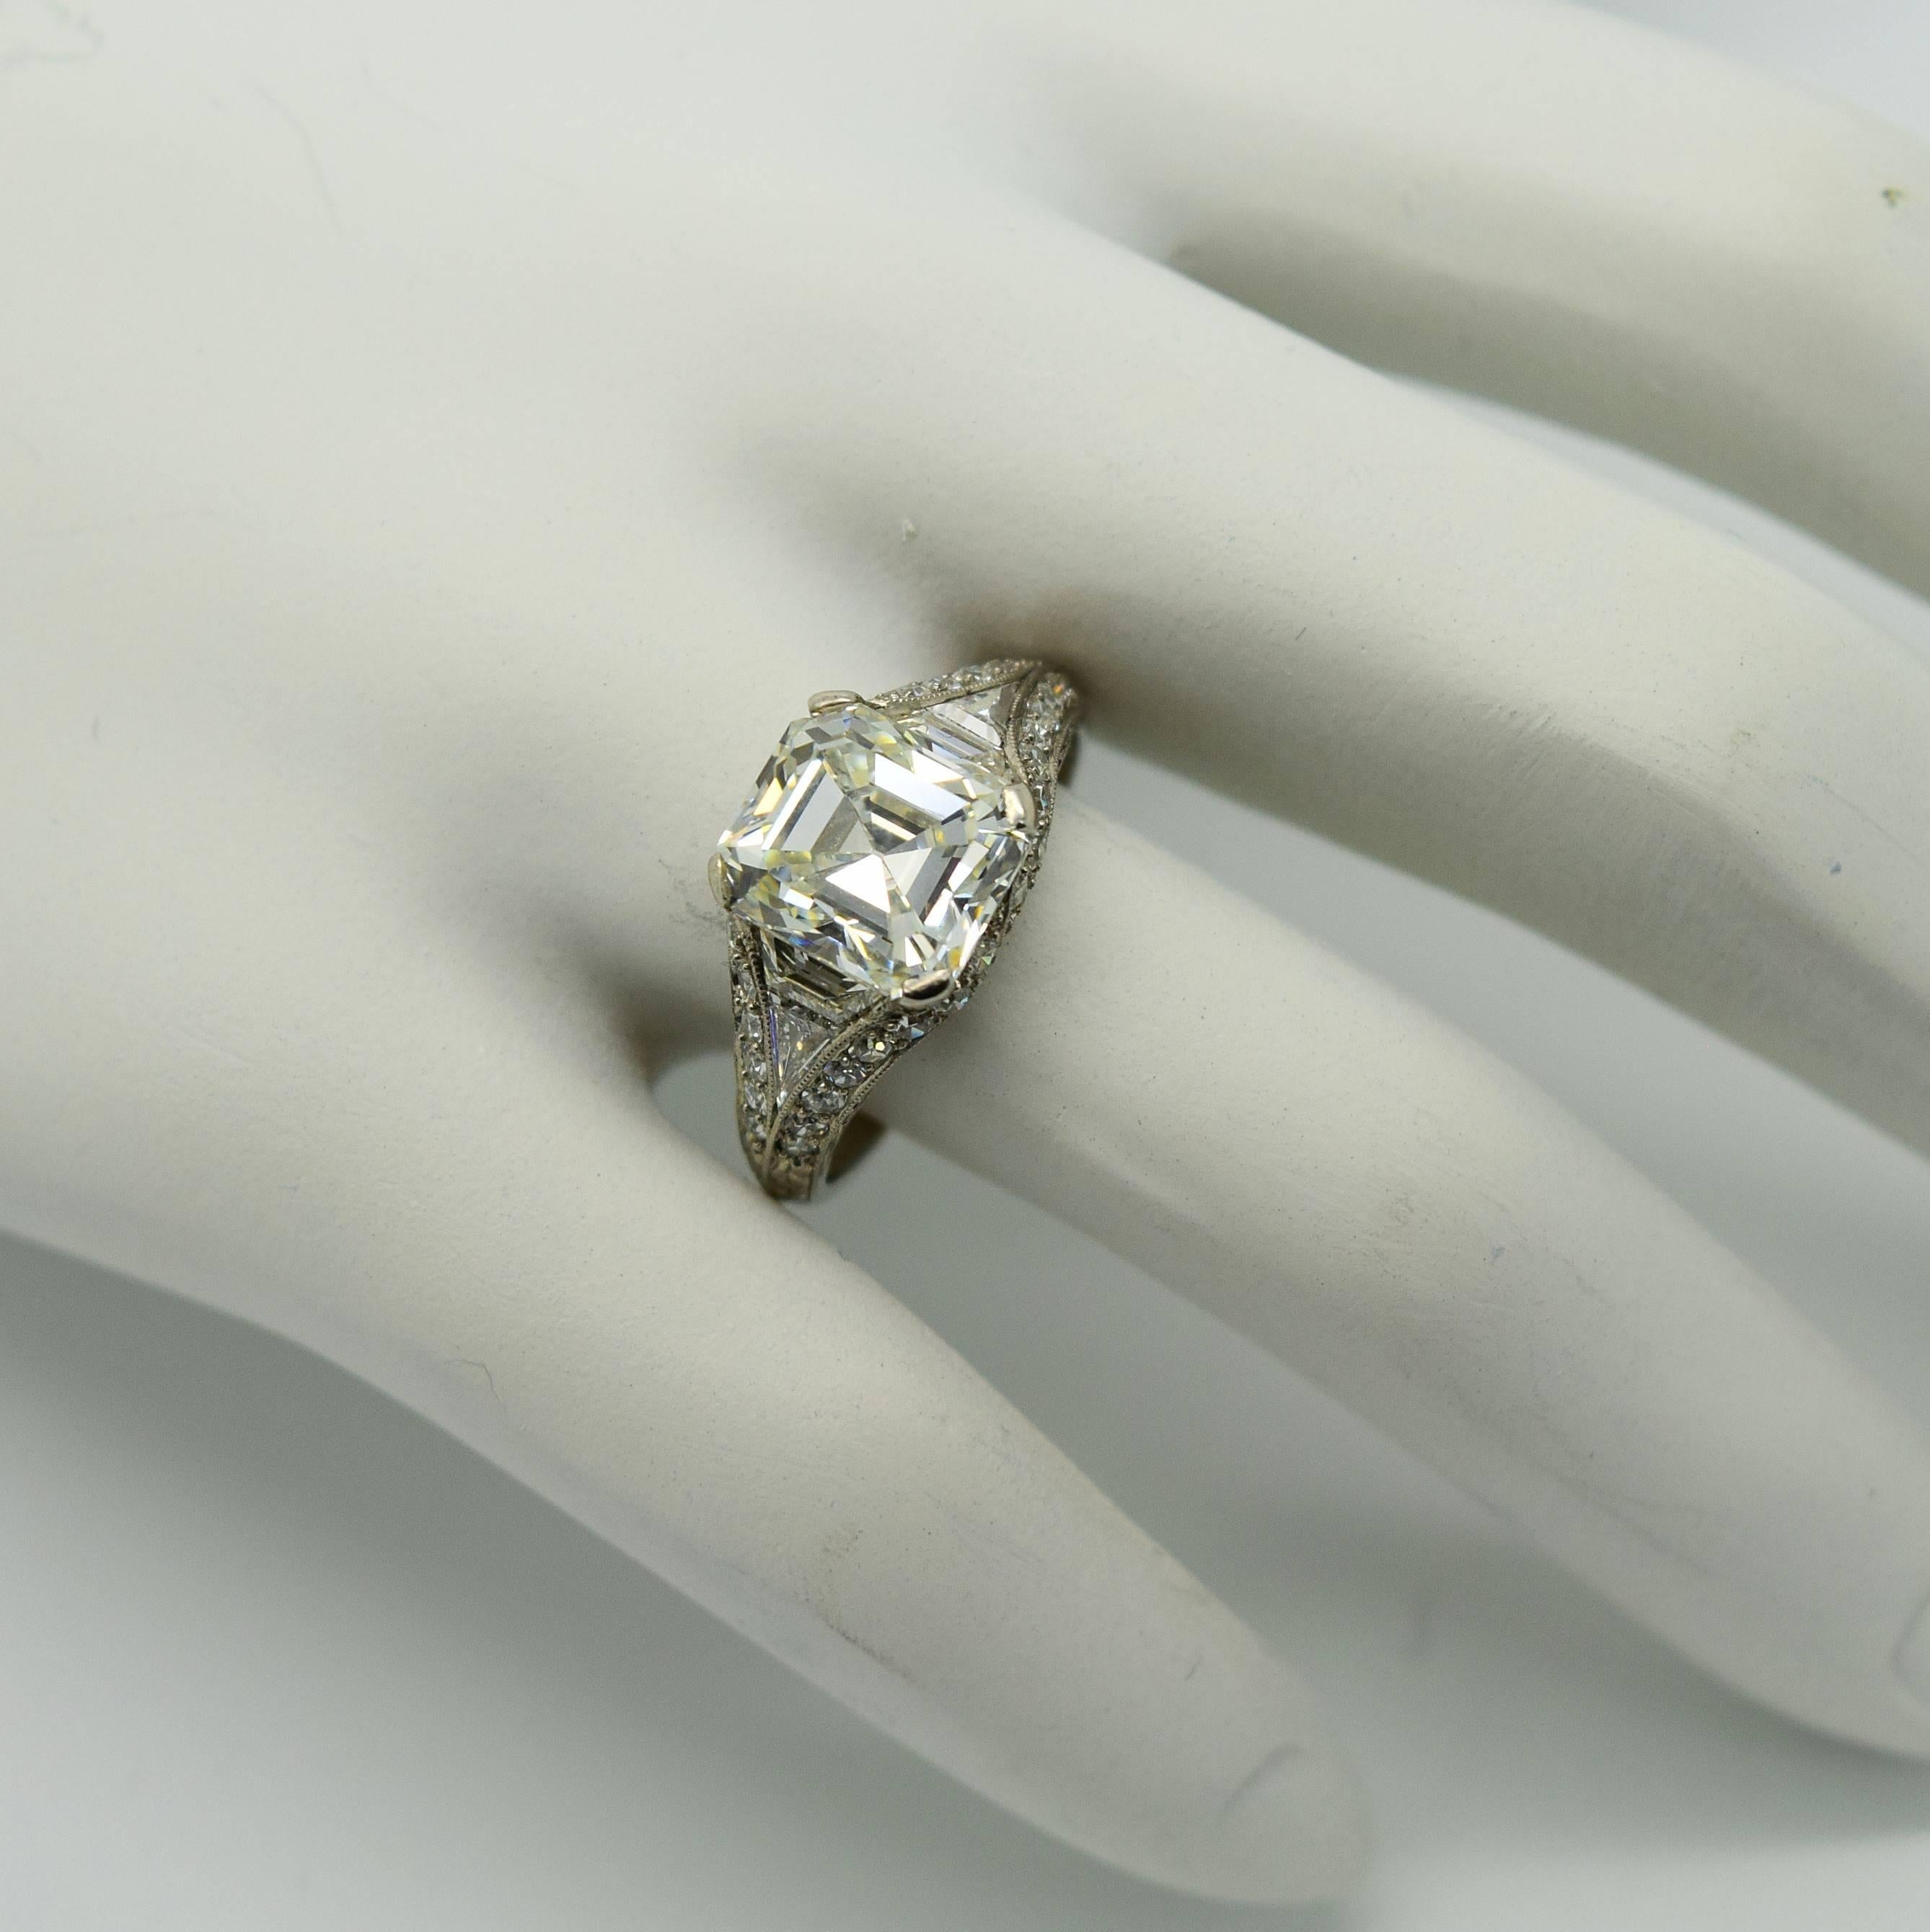 This is an exquisite Bailey Banks and Biddle Art Deco emerald cut diamond platinum filigree engagement ring from 1927. The center old emerald cut diamond weighs approximately 2.70cts. The side antique trapezoid, trillion and single cut diamonds